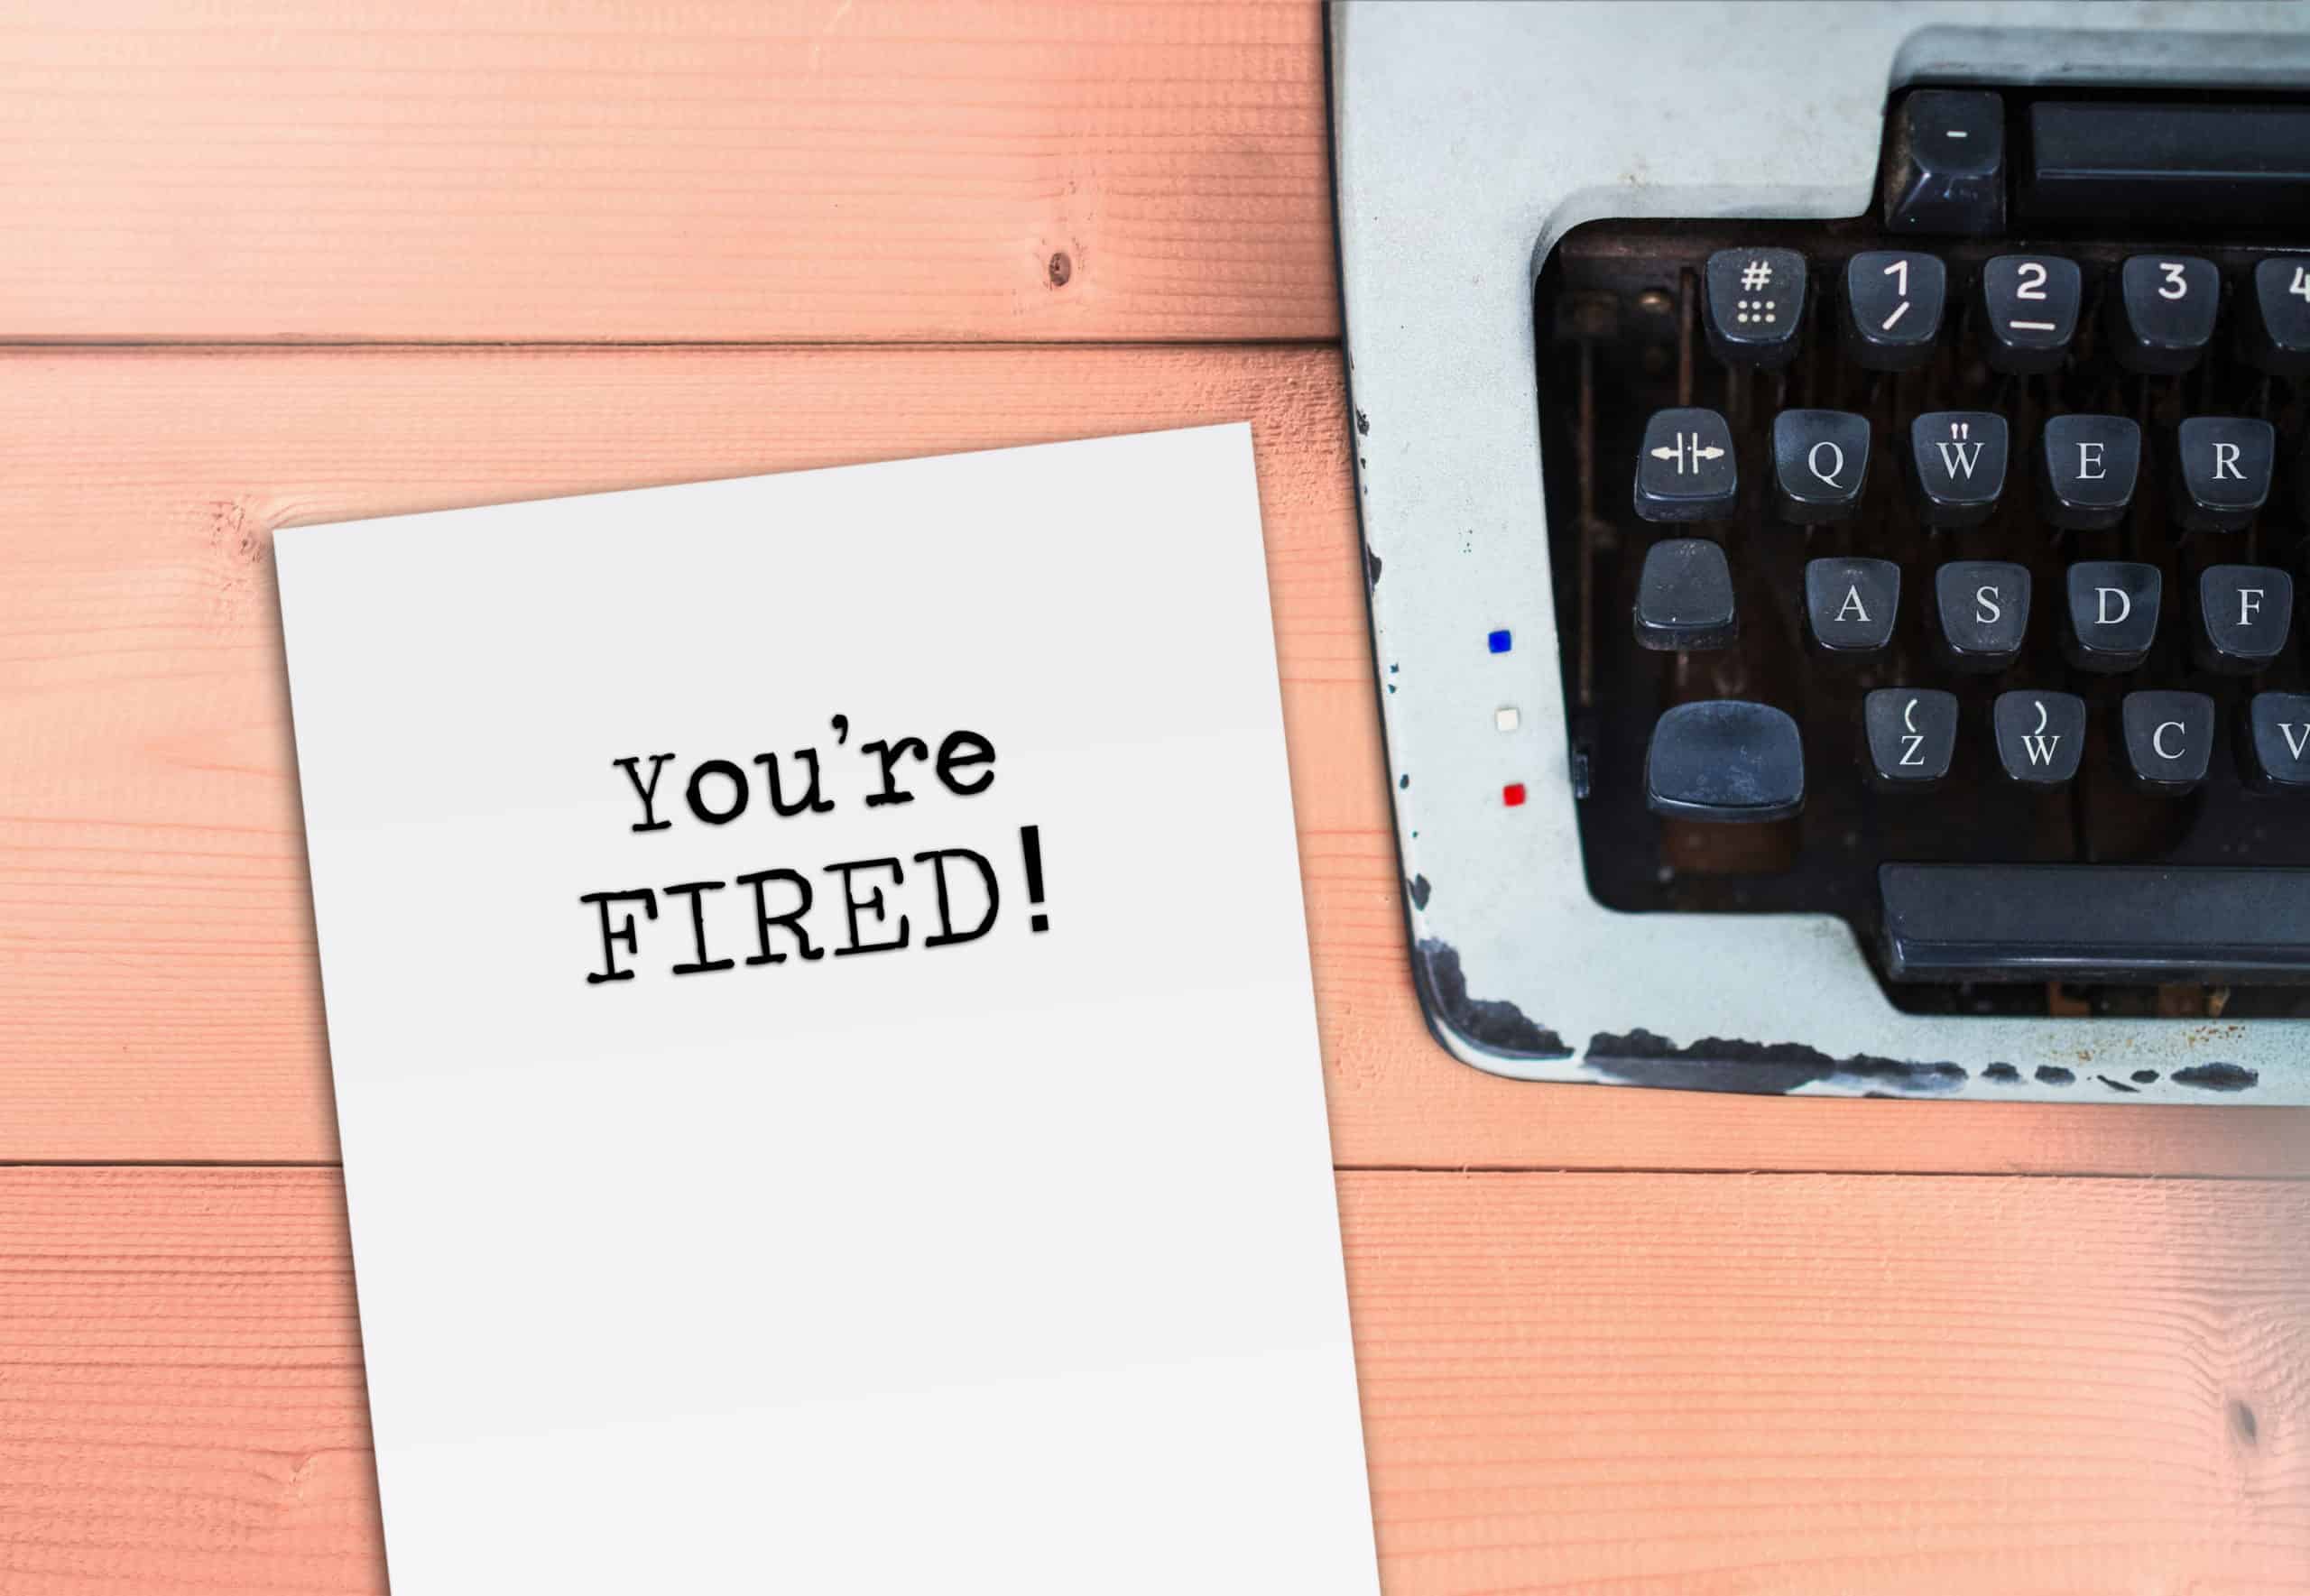 the words "You're FIRED!" typed on a piece of paper